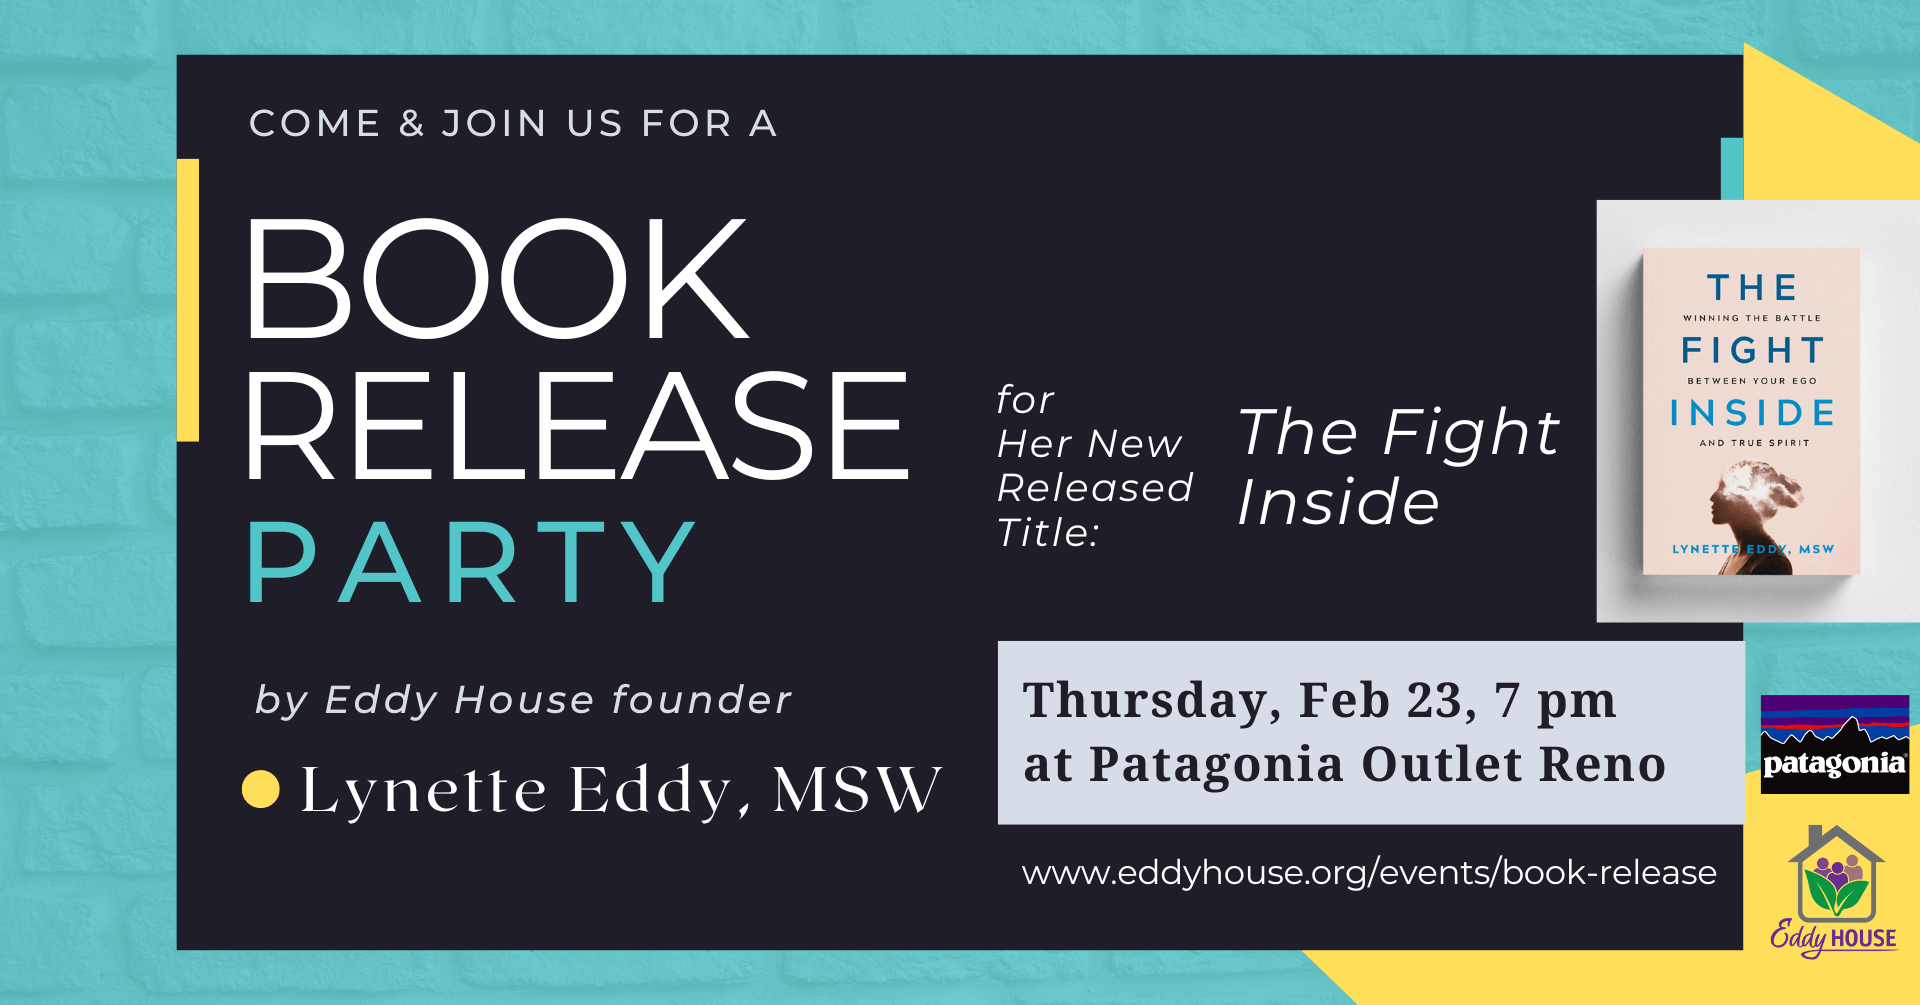 Banner advertising book release party on February 23rd, 2023 at 7 pm at the Patagonia Outlet.